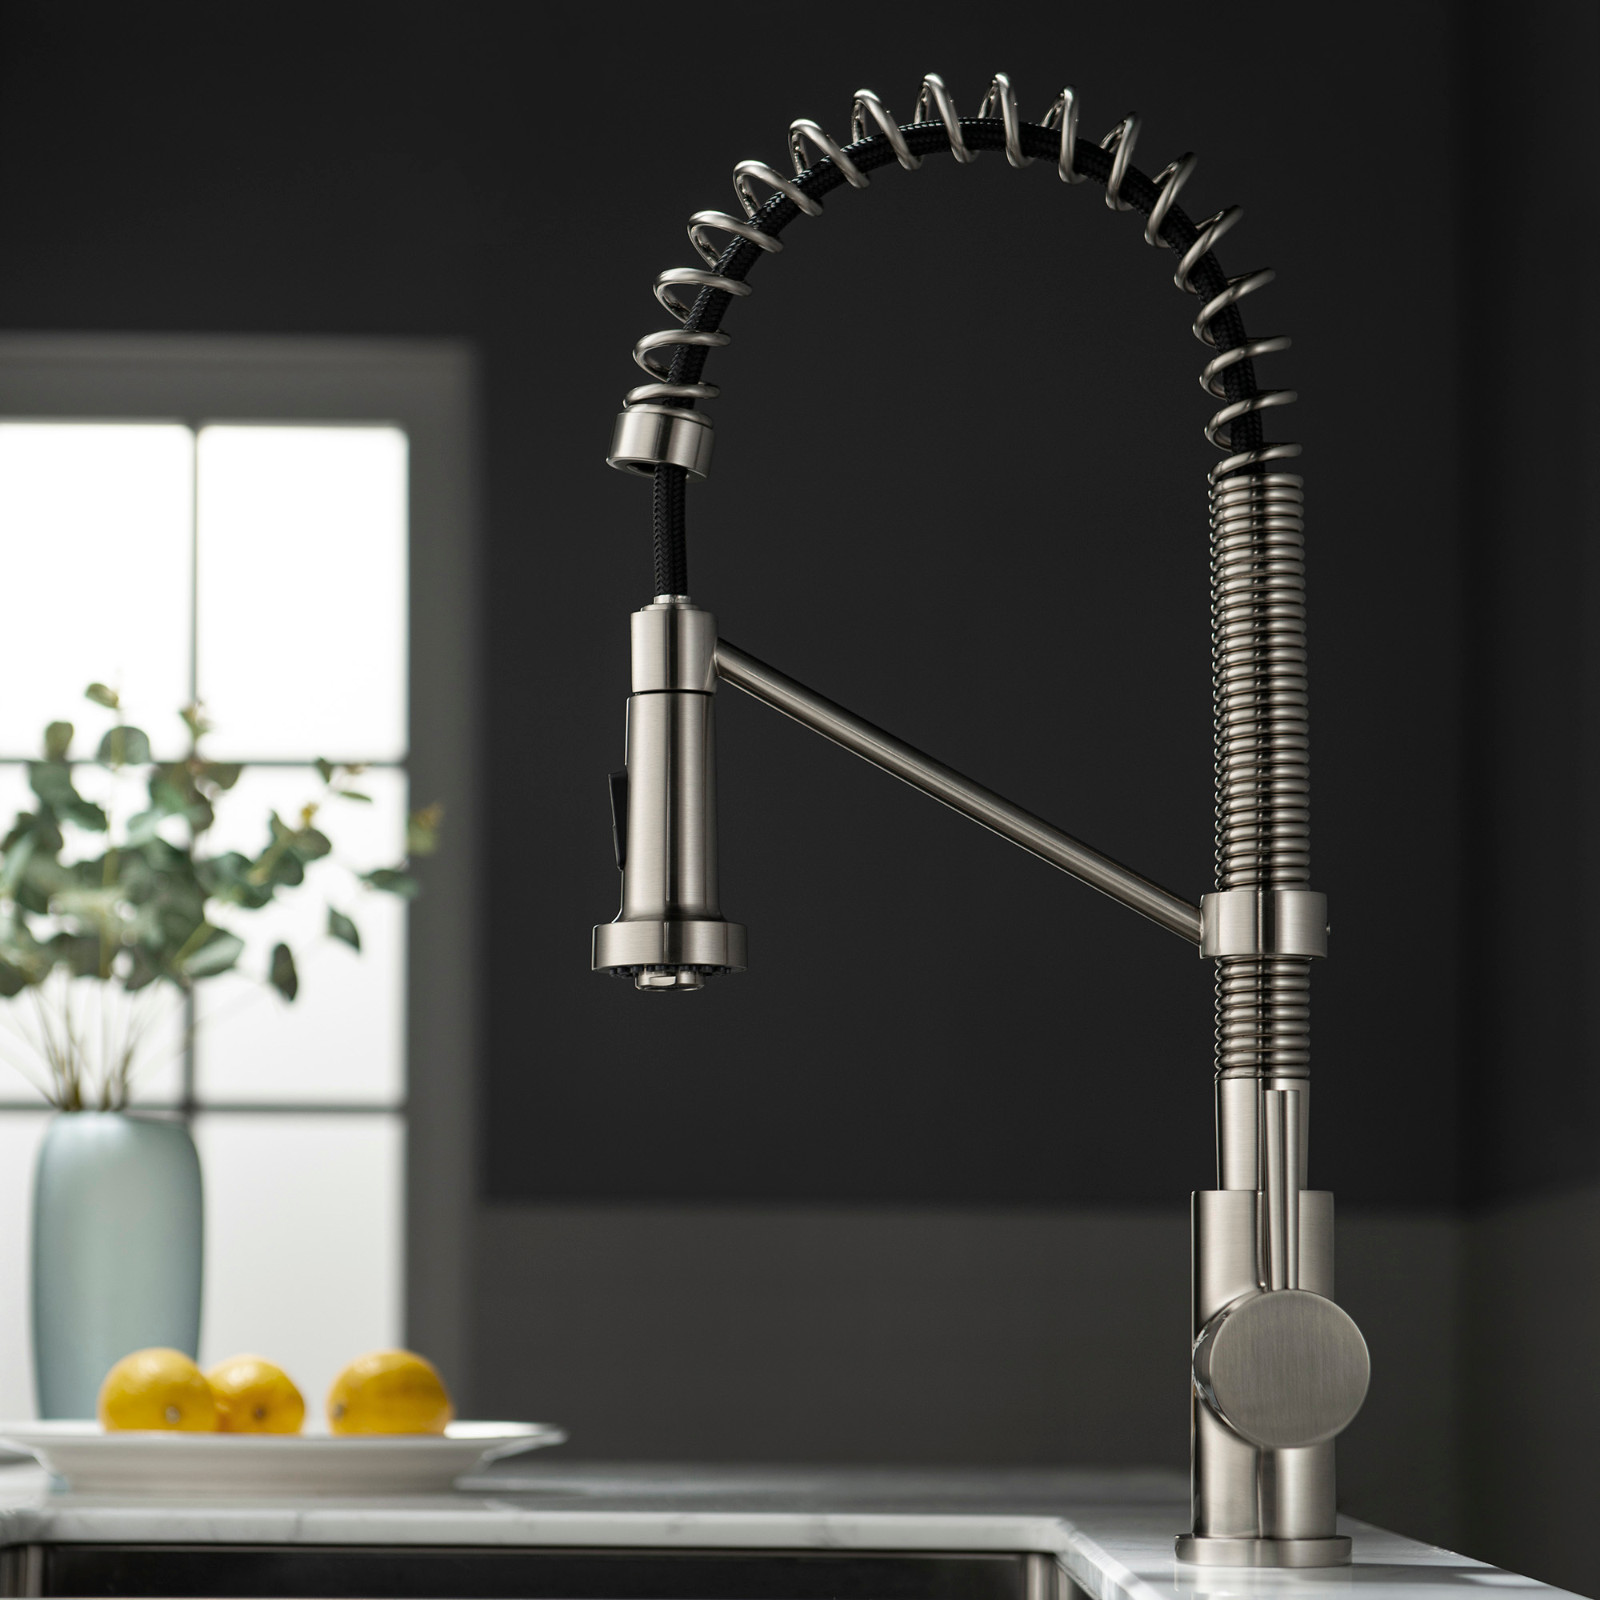  WOODBRIDGE WK010203BN Stainless Steel Single Handle Spring Coil Pre-Rinse Kitchen Faucet with Pull Down Sprayer, Brushed Nickel Finish_9477